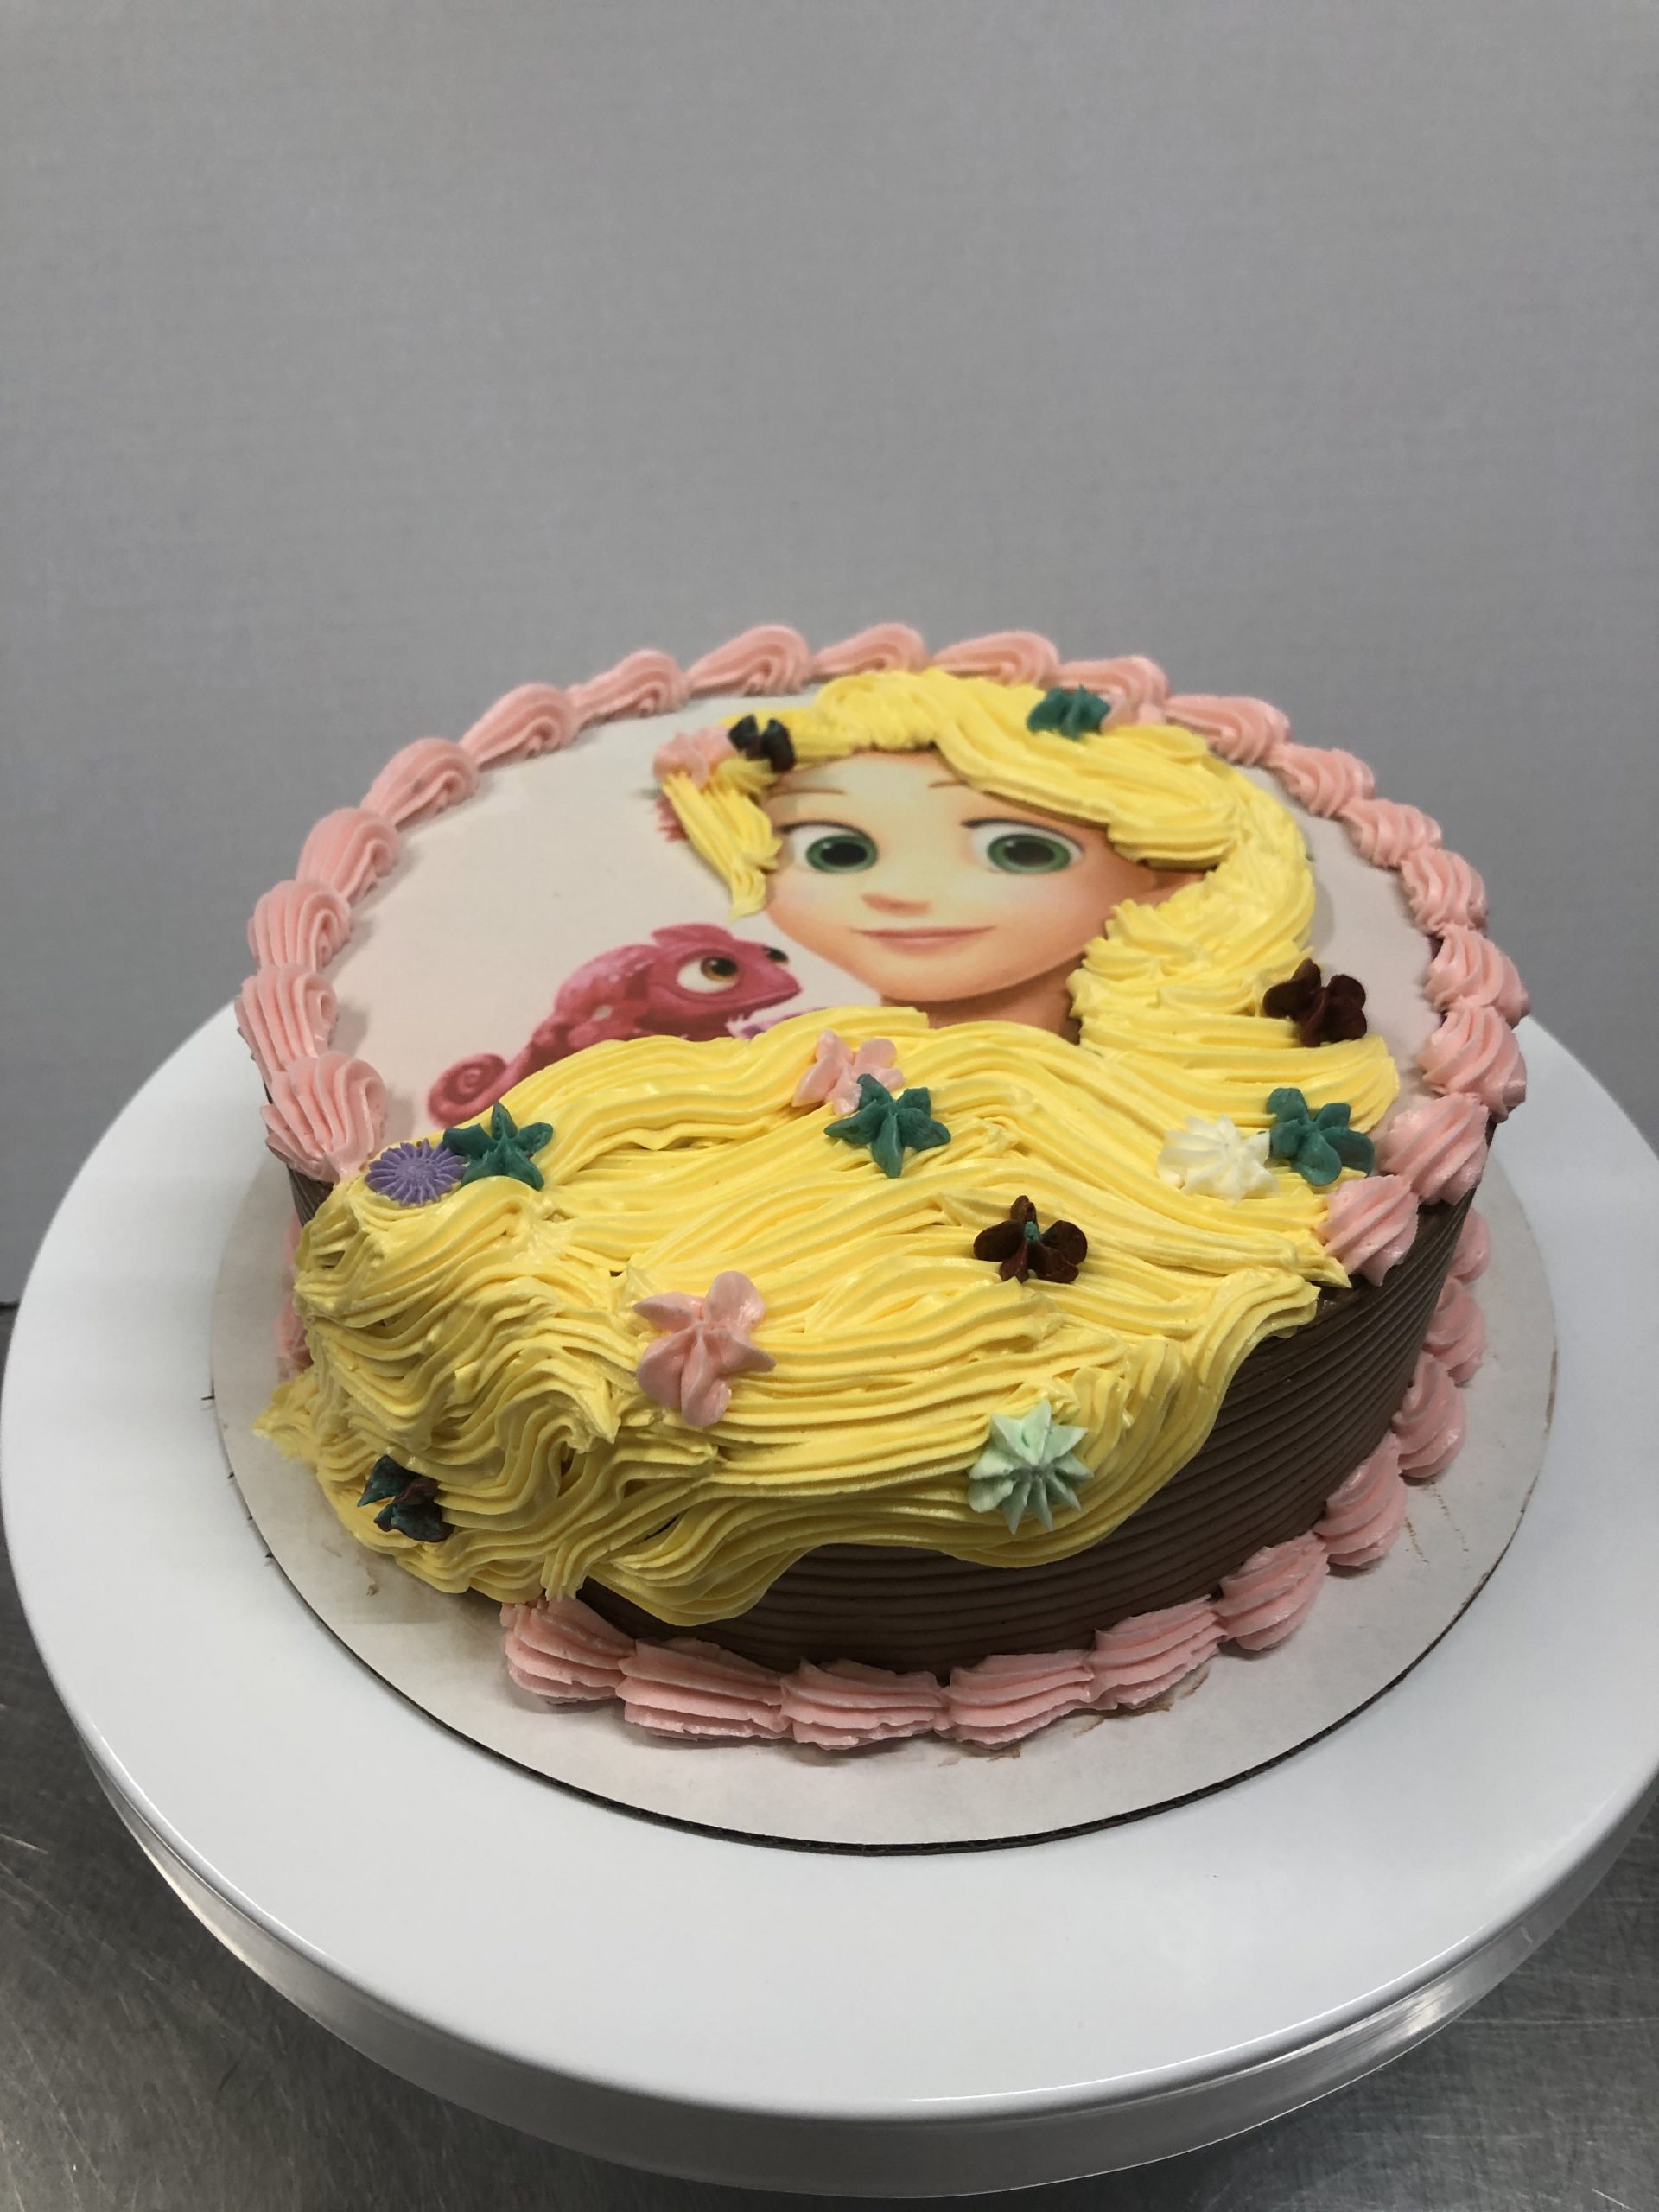 Pastry Chef Presents Disney-Inspired Desserts Perfect For All Occasions |  Woman.ph